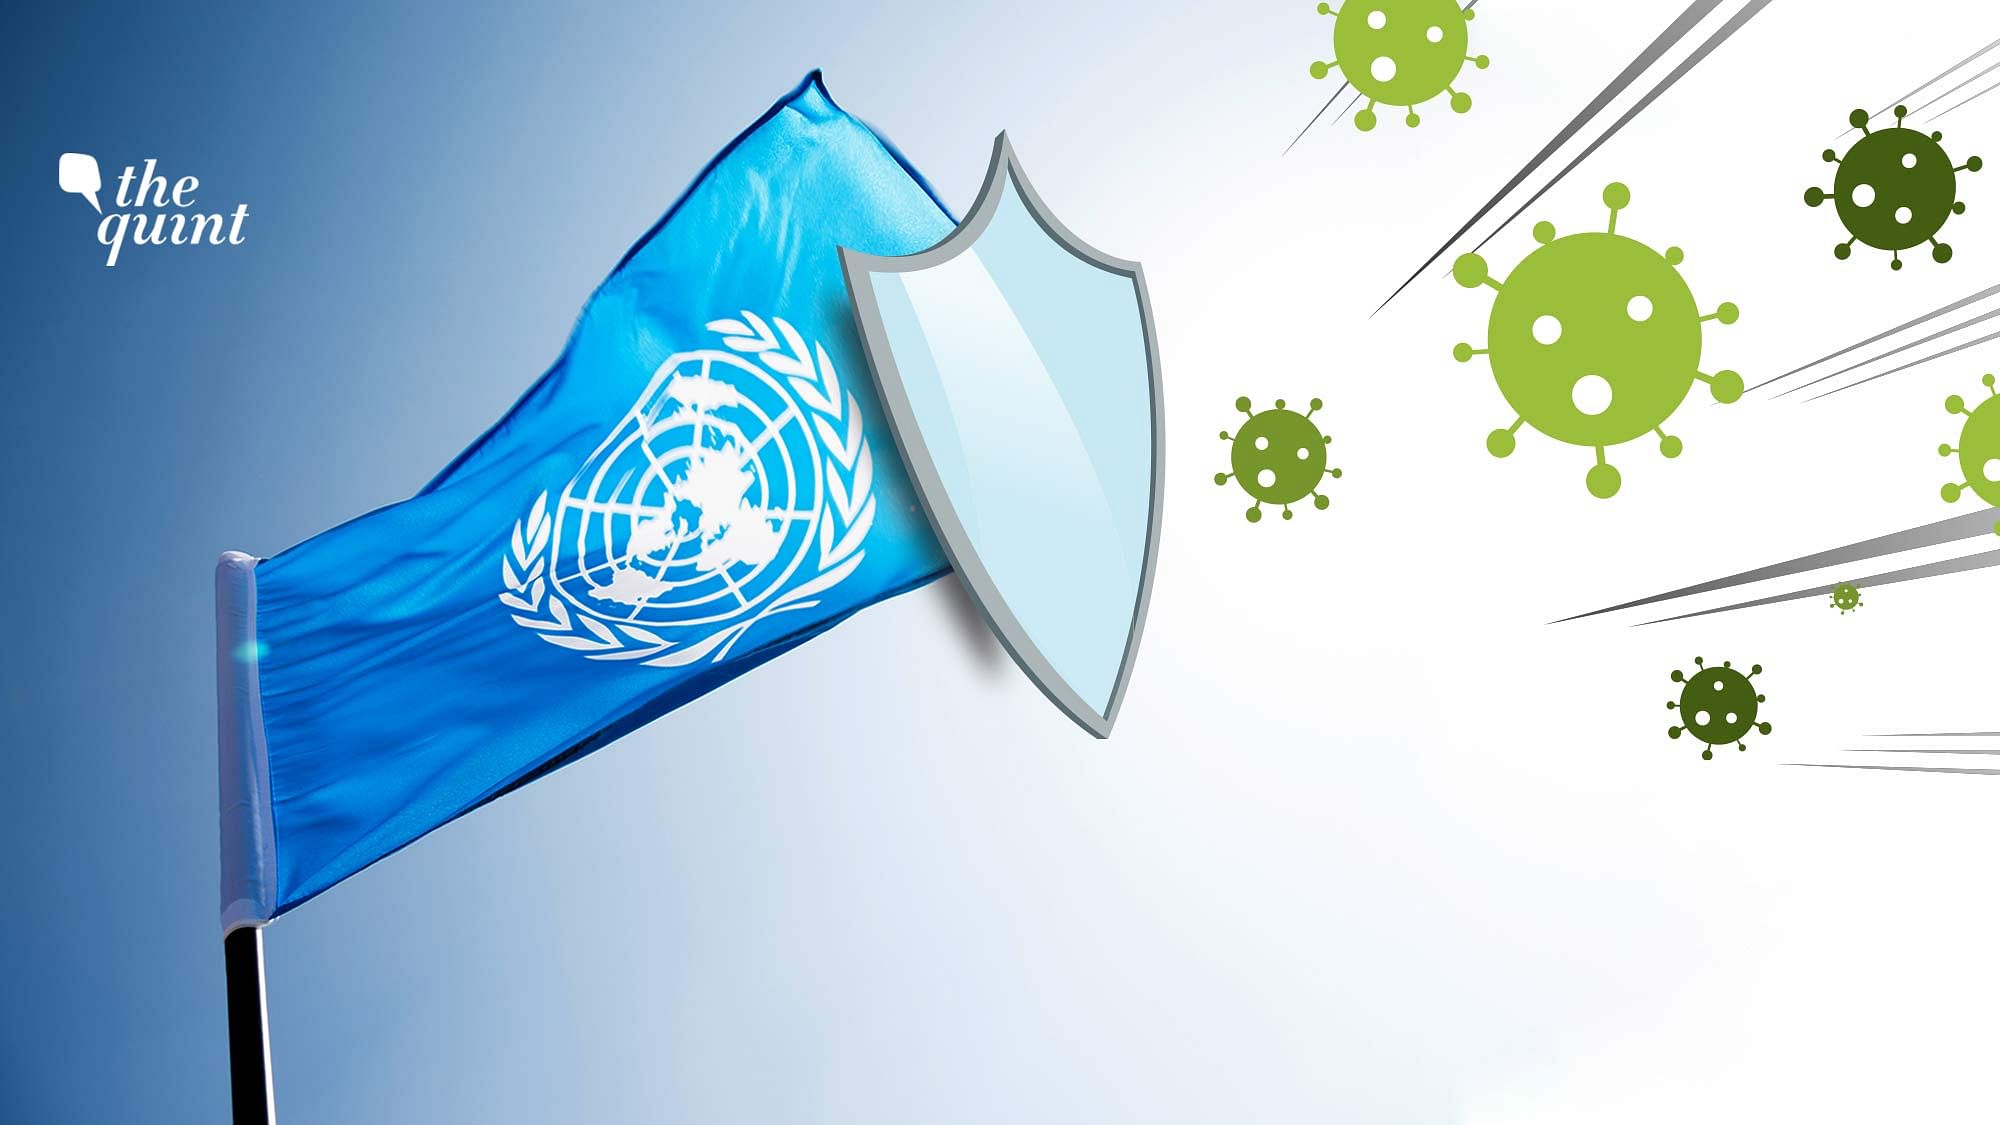 Image of UN flag and illustration of the coronavirus used for representational purposes.